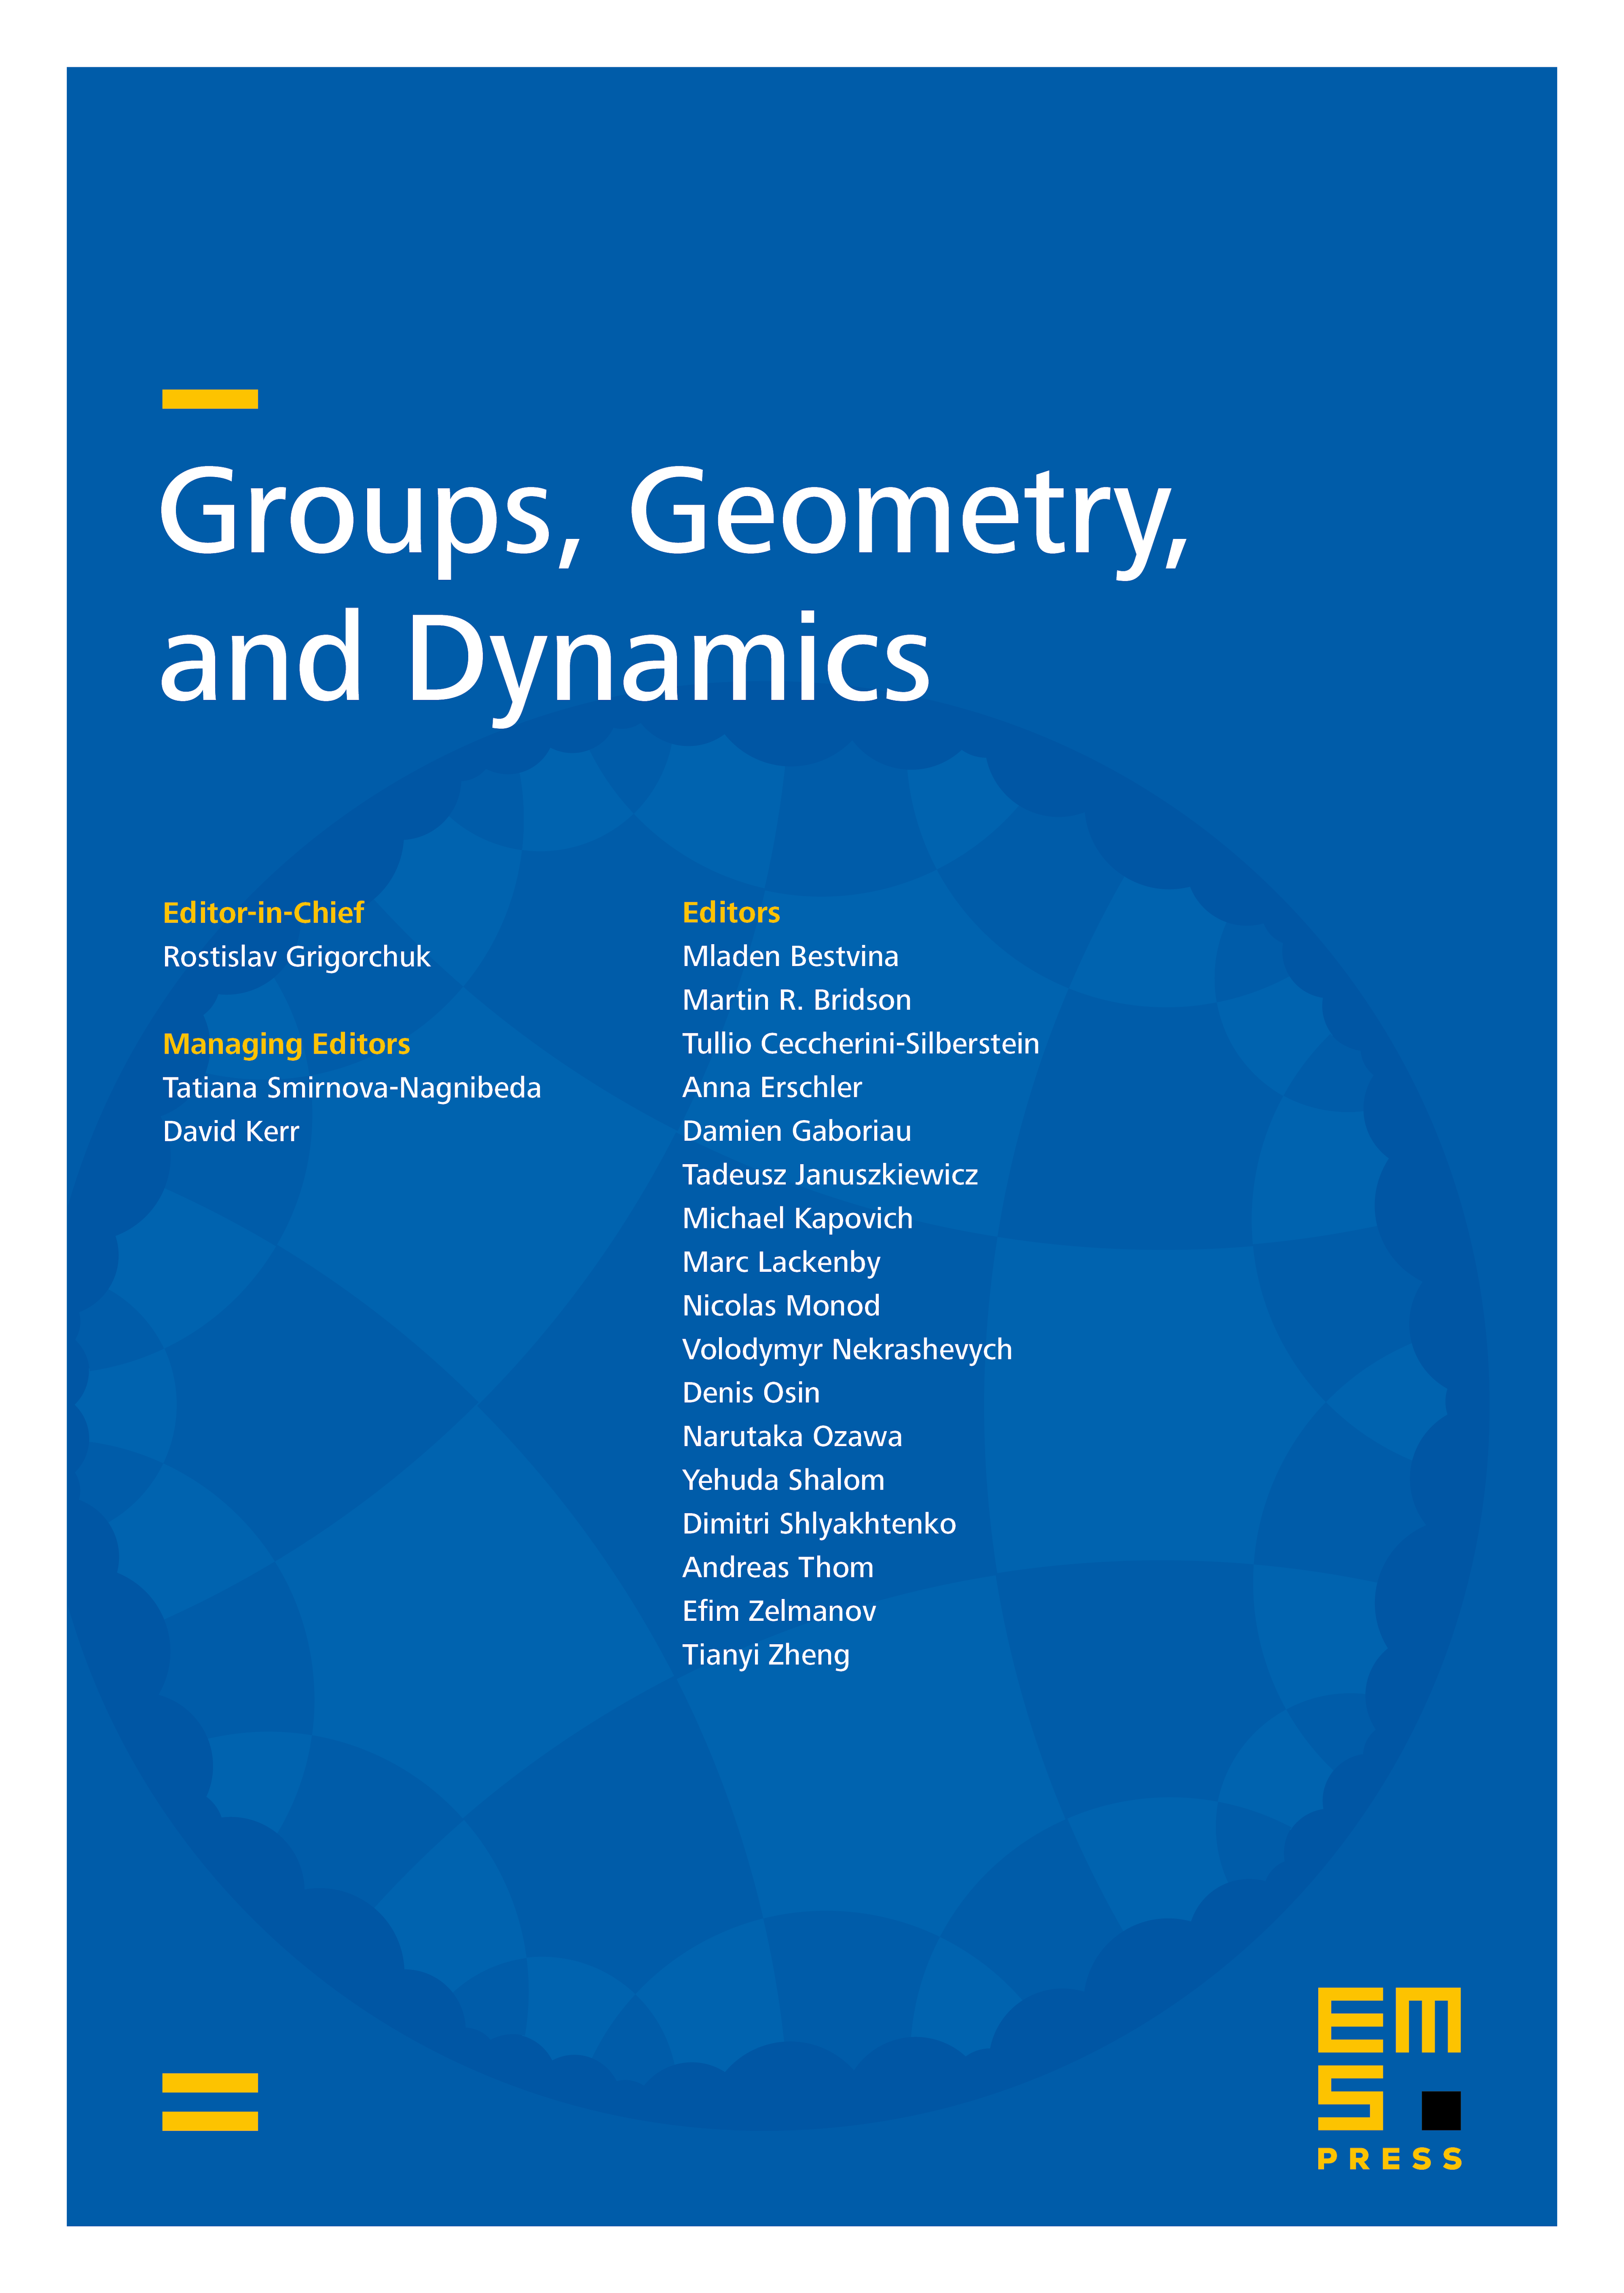 New uniform diameter bounds in pro-$p$ groups cover